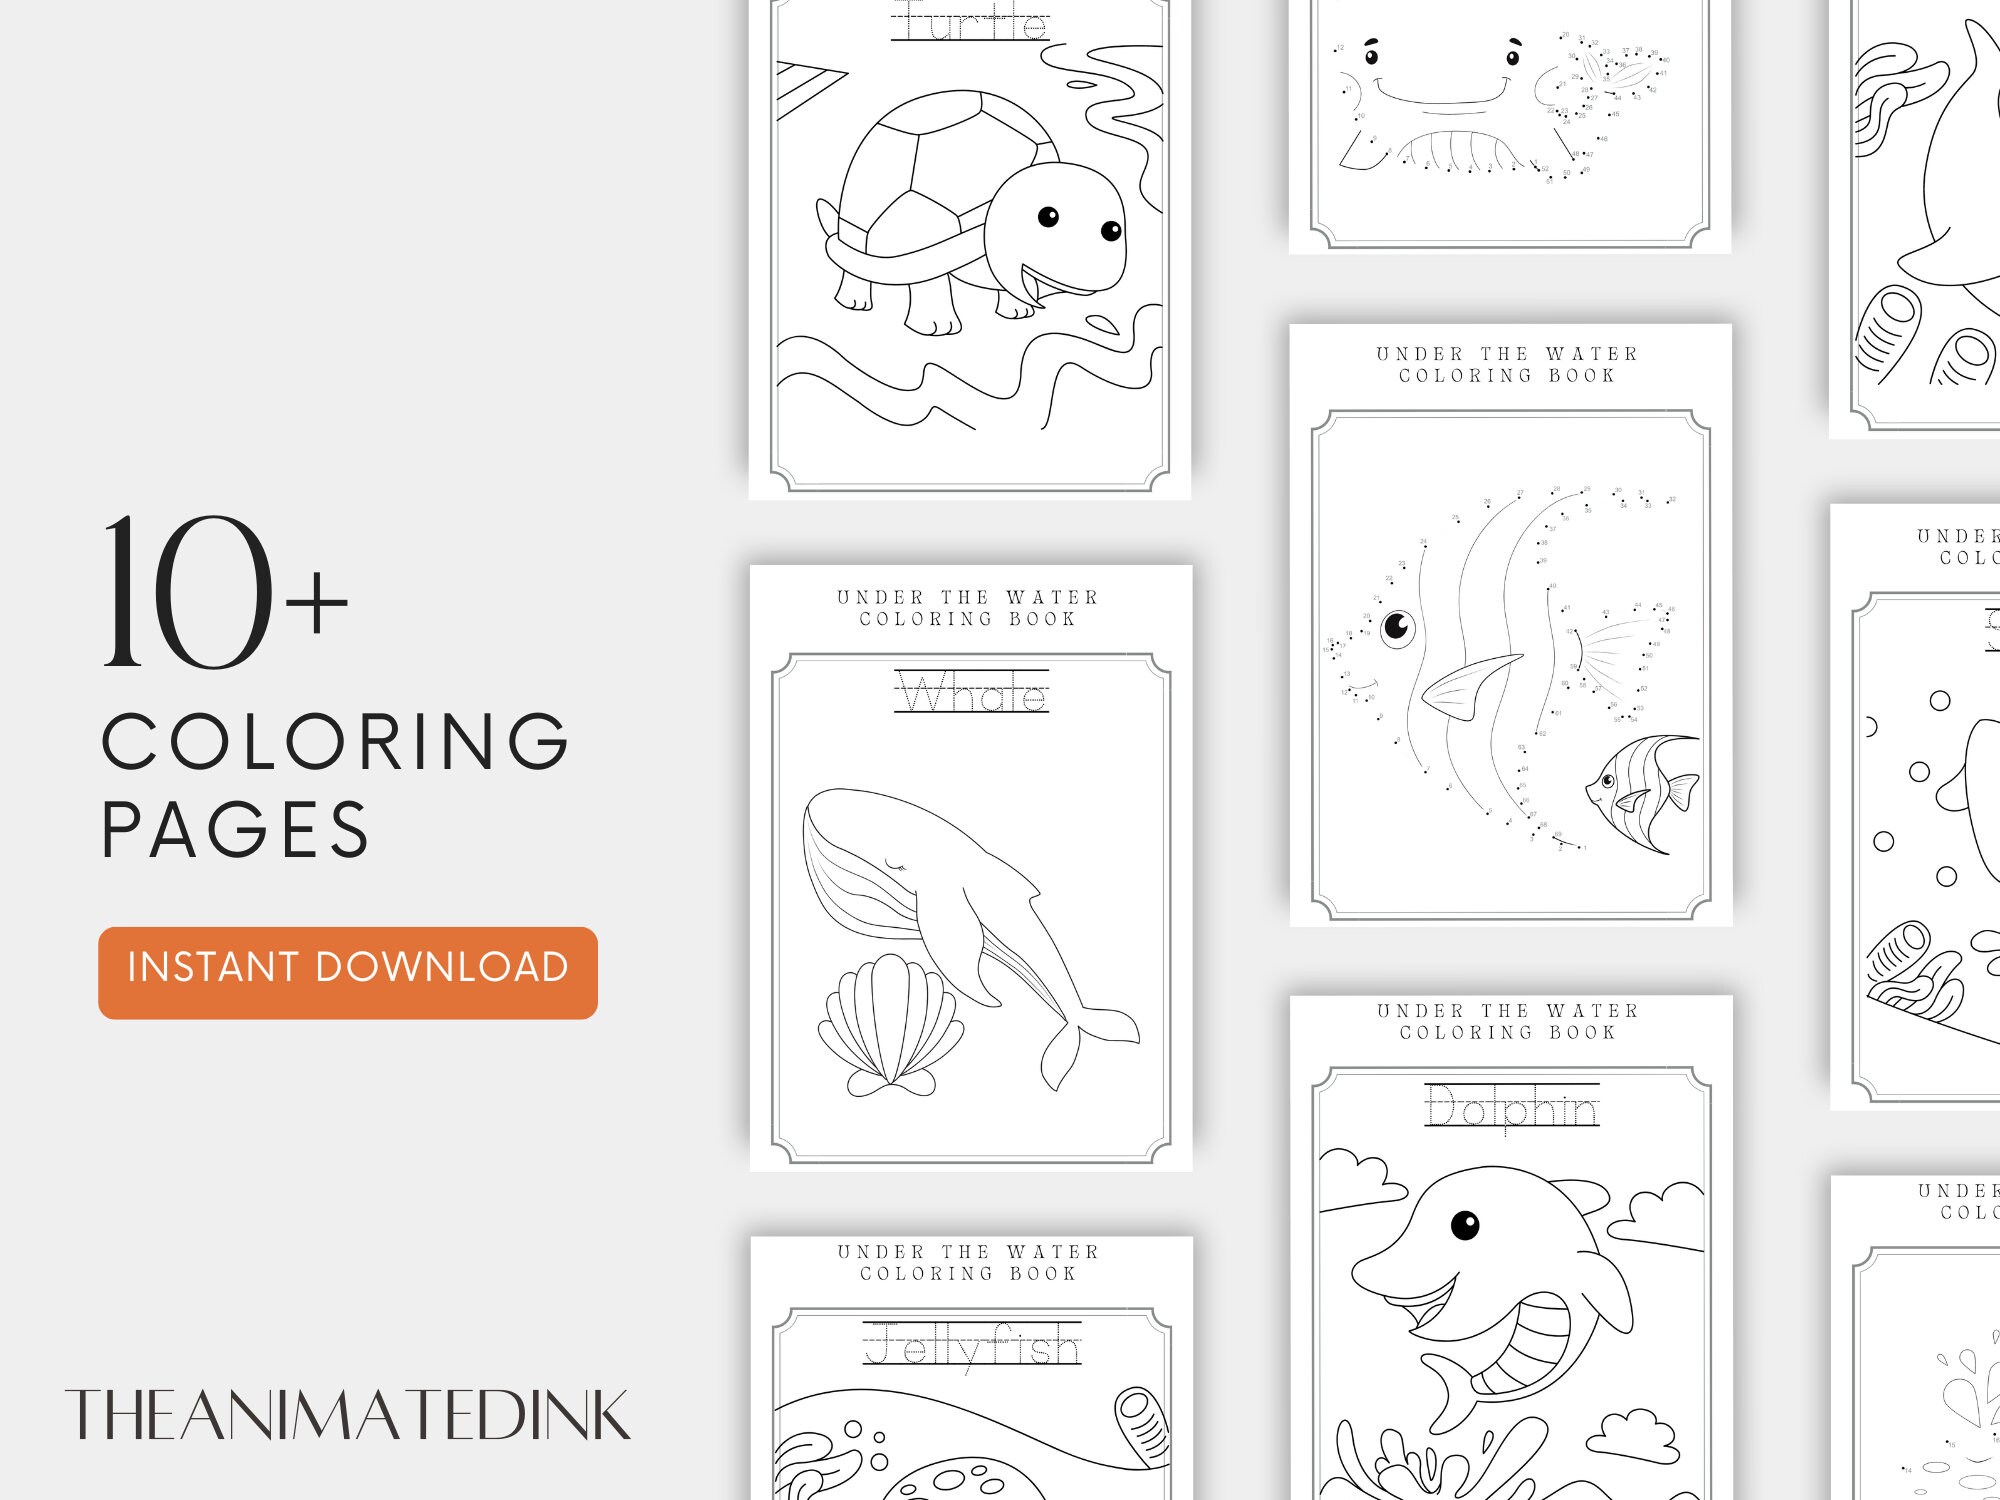 Coloring pages for kids gift ideas digital art